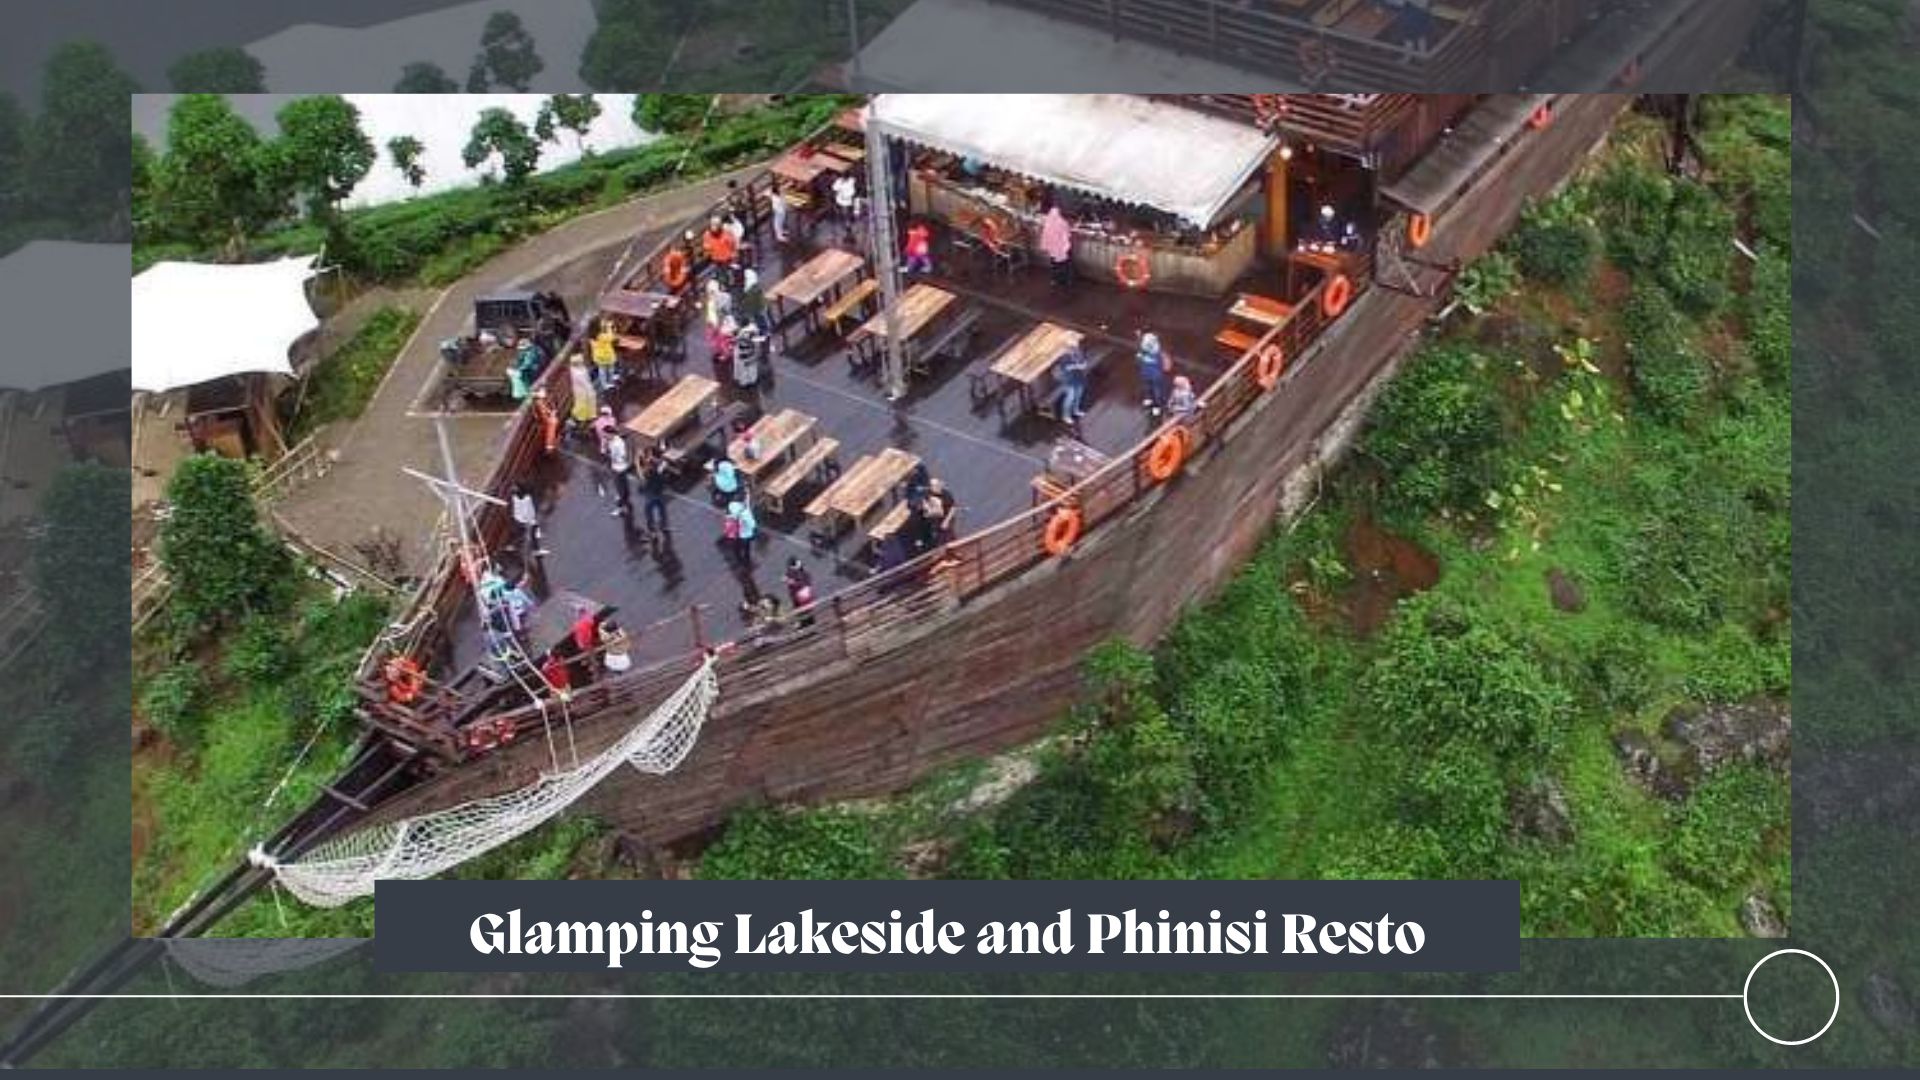 Glamping Lakeside and Phinisi Resto